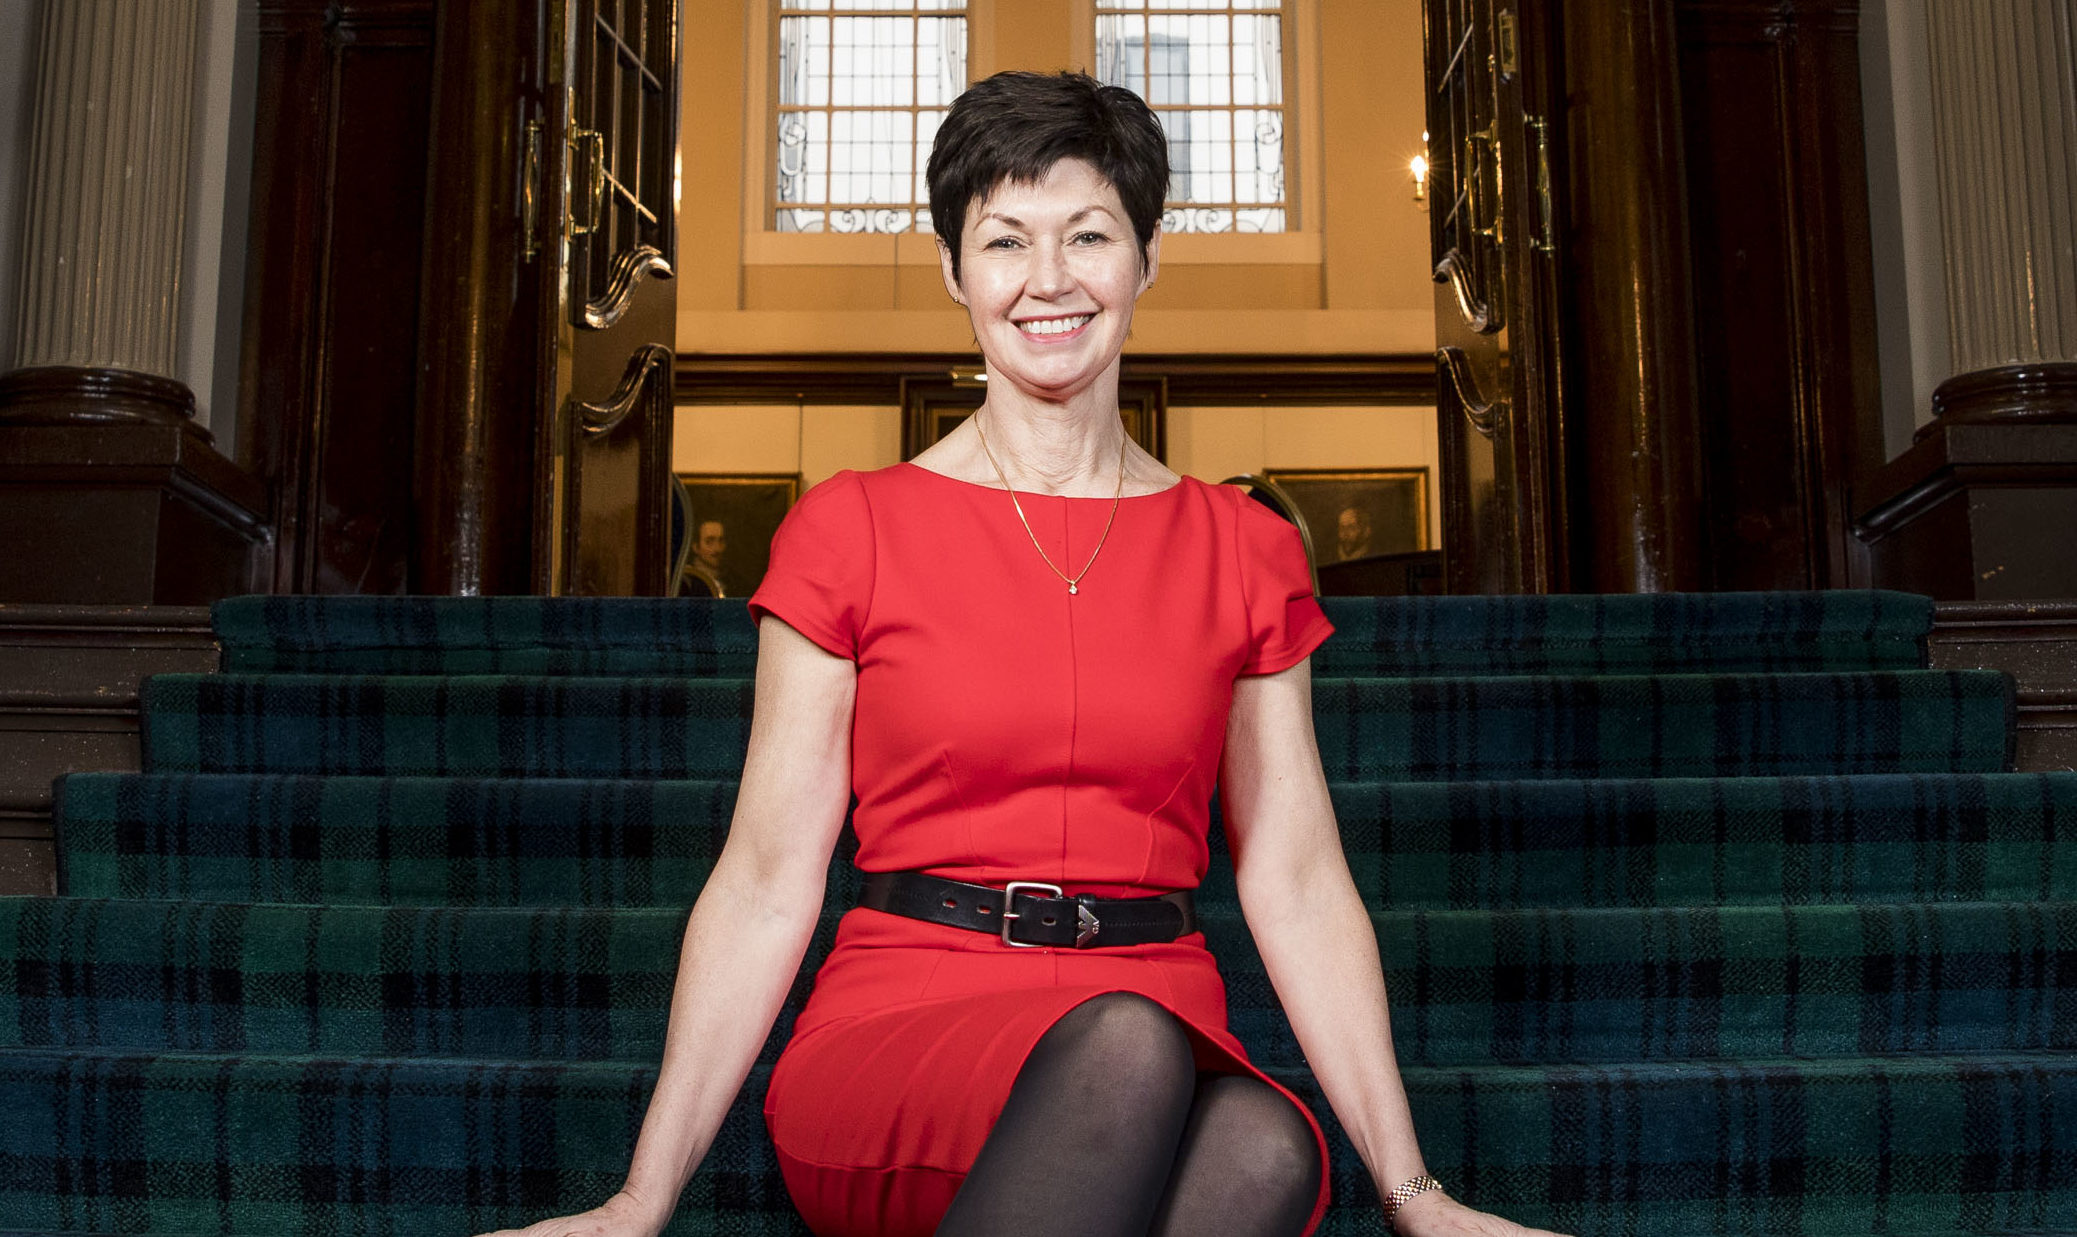 Jackie Taylor in the Royal College where she is first female president (Andrew Cawley / DC Thomson)